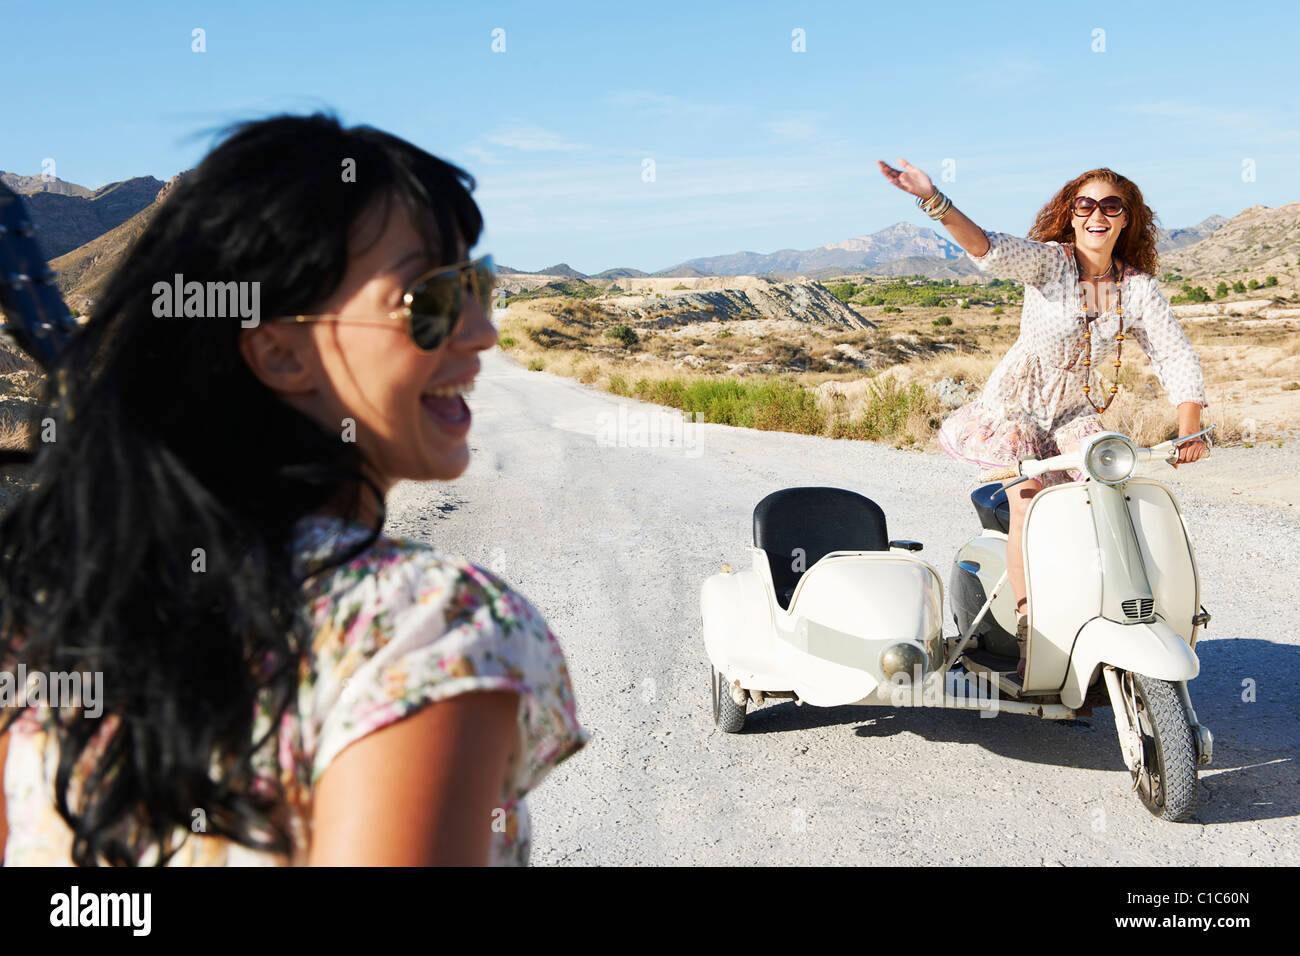 Women with motorbike and sidecar Stock Photo